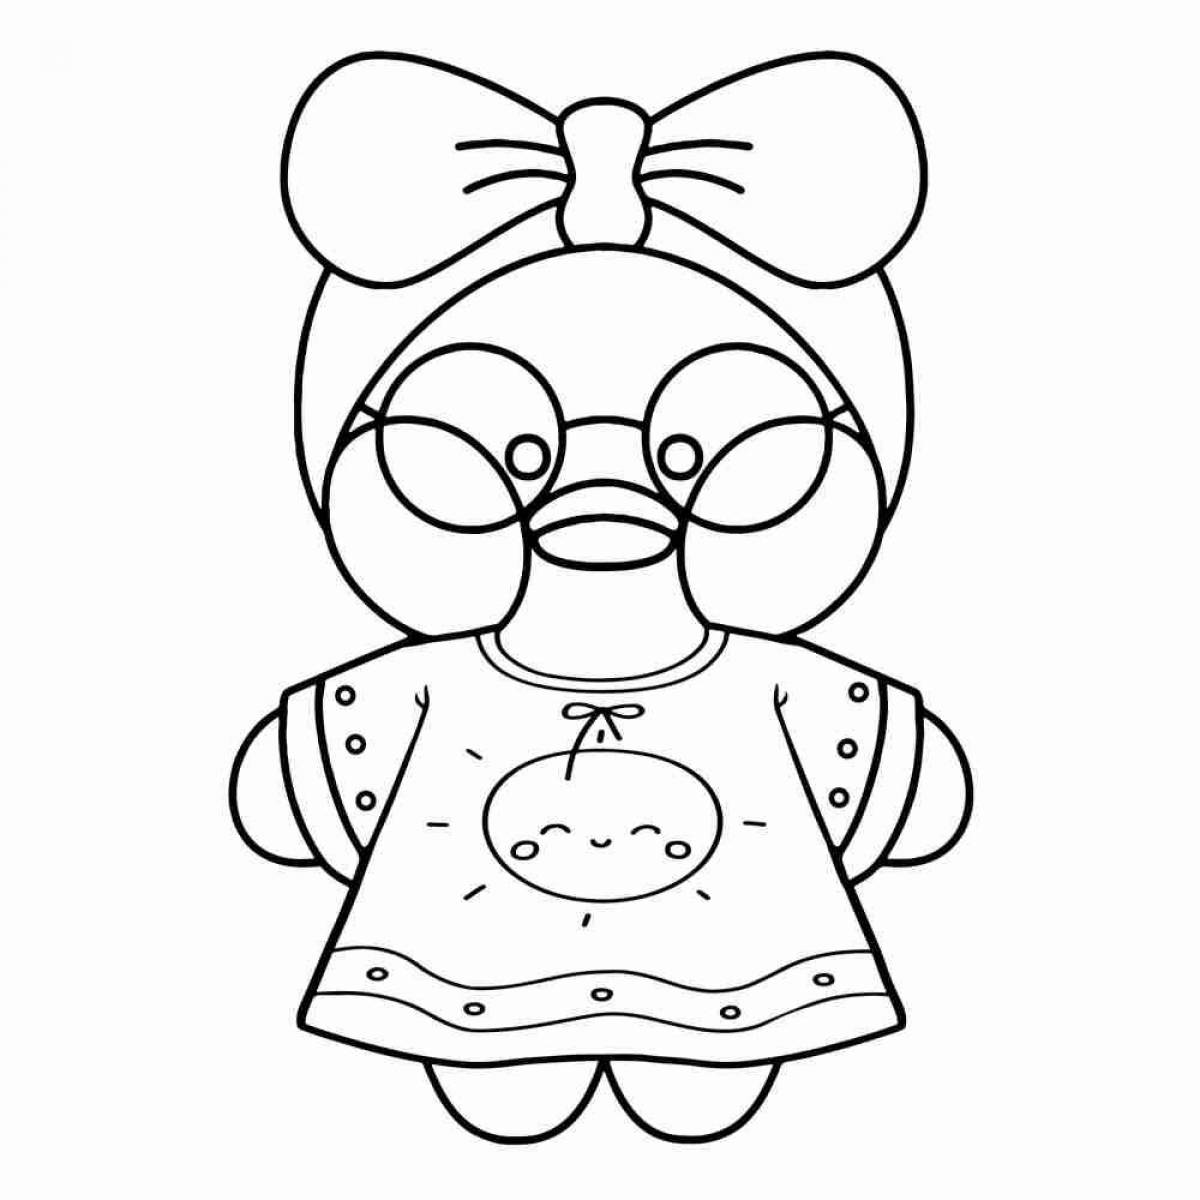 Lalafanfan the rampaging duck coloring page